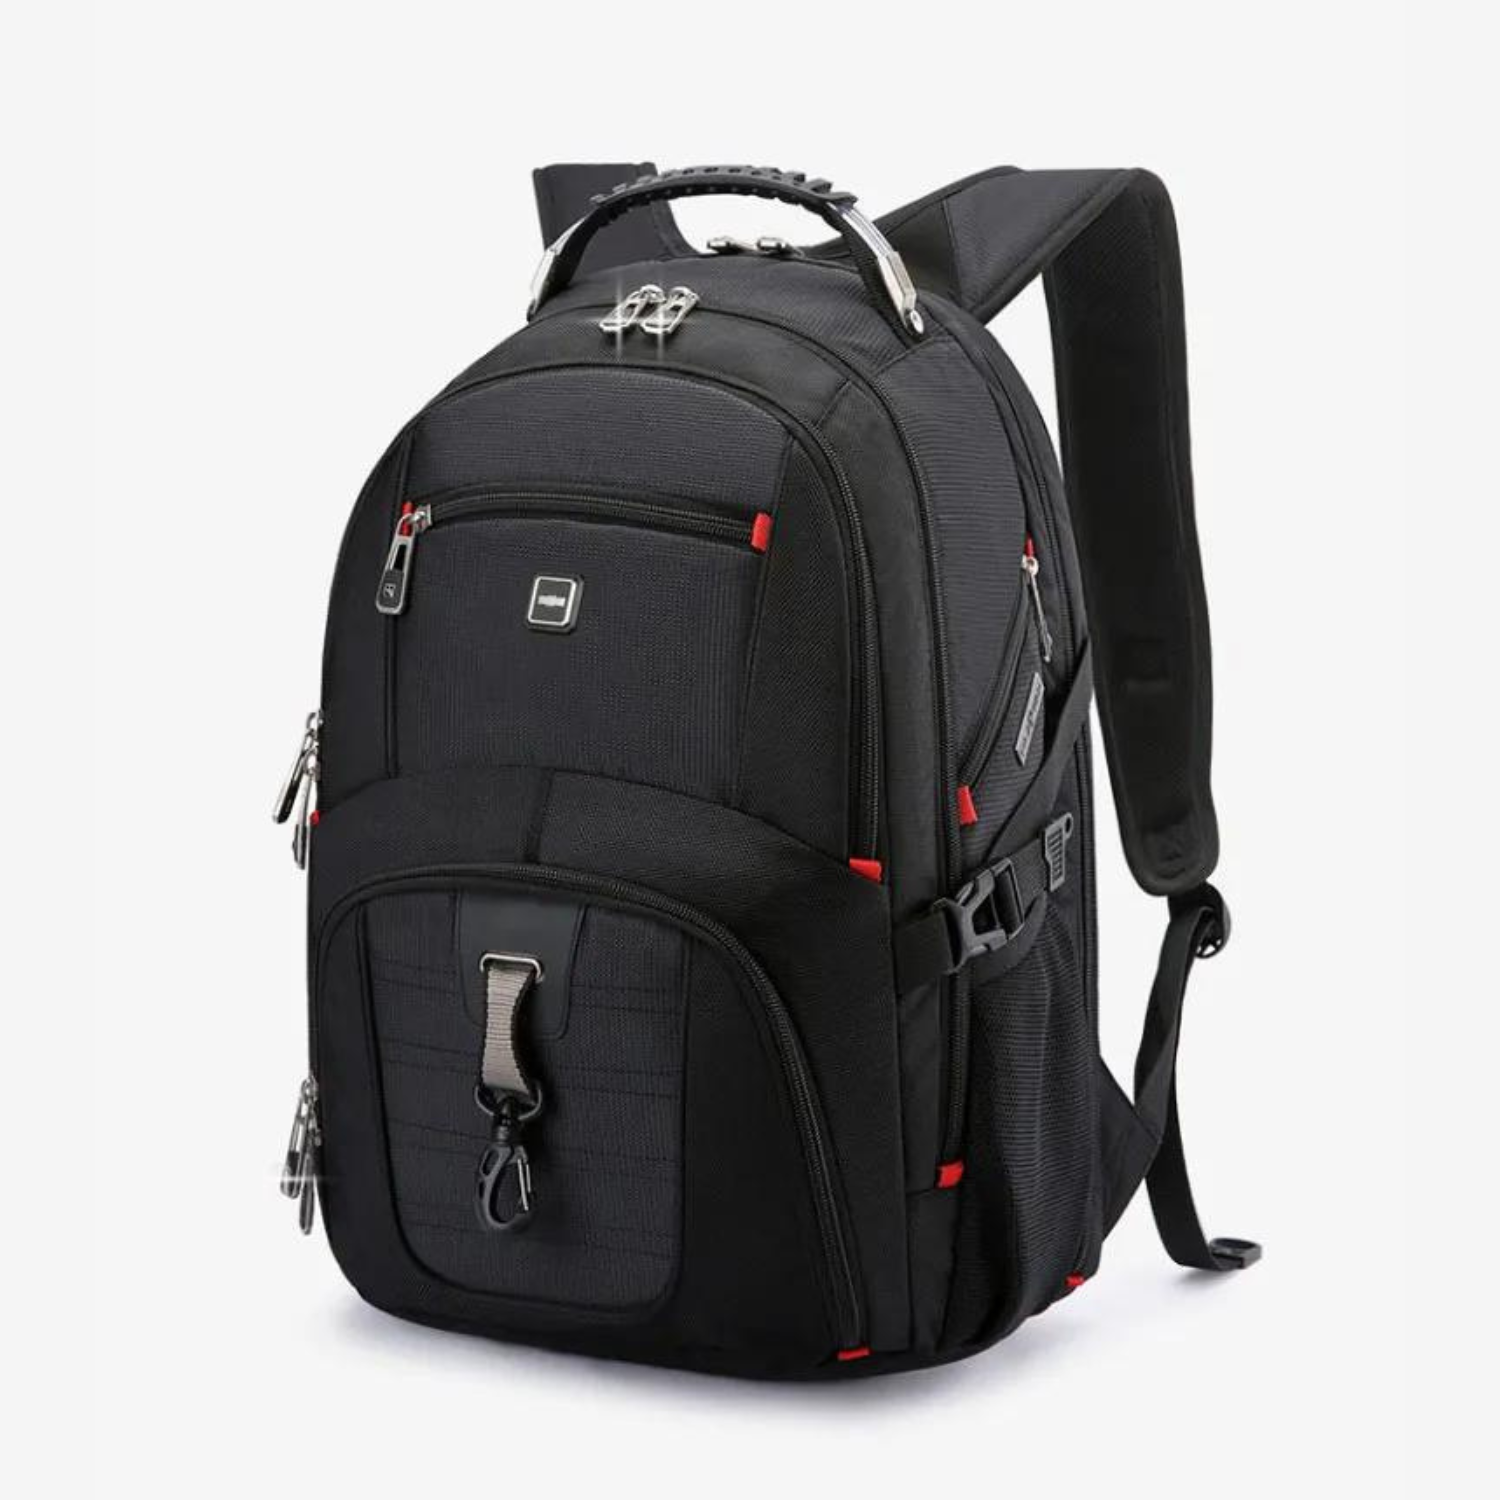 Swiss-Designed Water-Resistant Travel Bag with USB Port